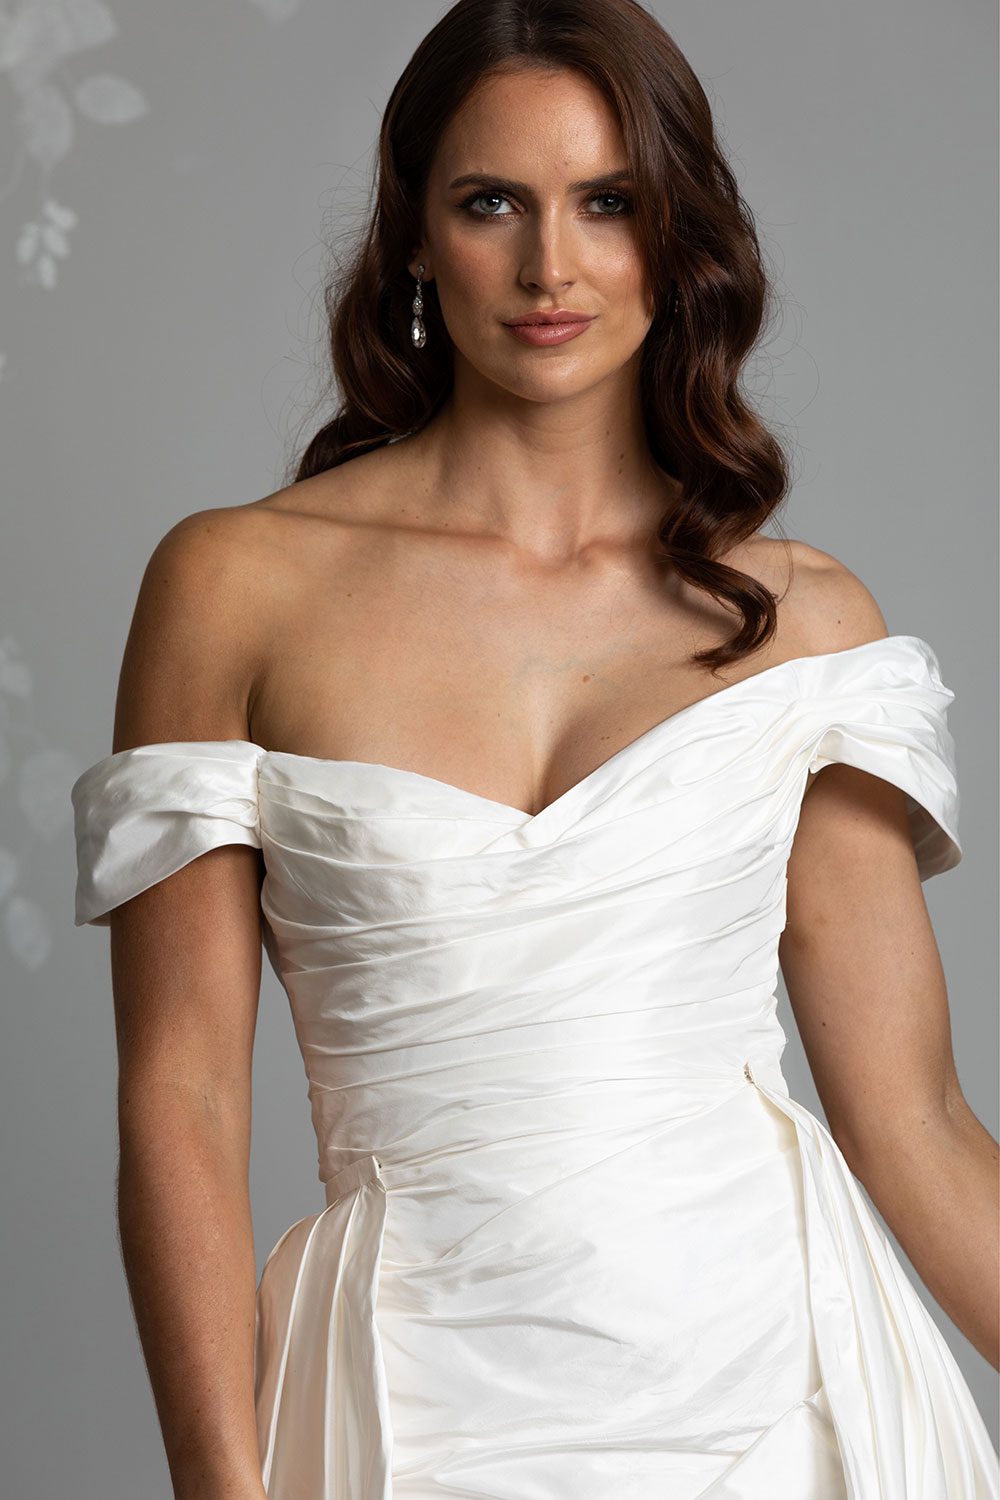 Marcella Wedding Dress by Vinka Design - An indulgent bridal gown of pure opulence. Marcella's statement look is emphasised through dramatic, draped folds of crisp Italian silk taffeta and delicate off shoulder detailing. The base gown features a sculptural fit-and-flare silhouette which fans into a small, elegant train. Close up view of off shoulder silk taffeta gown with draped detailing